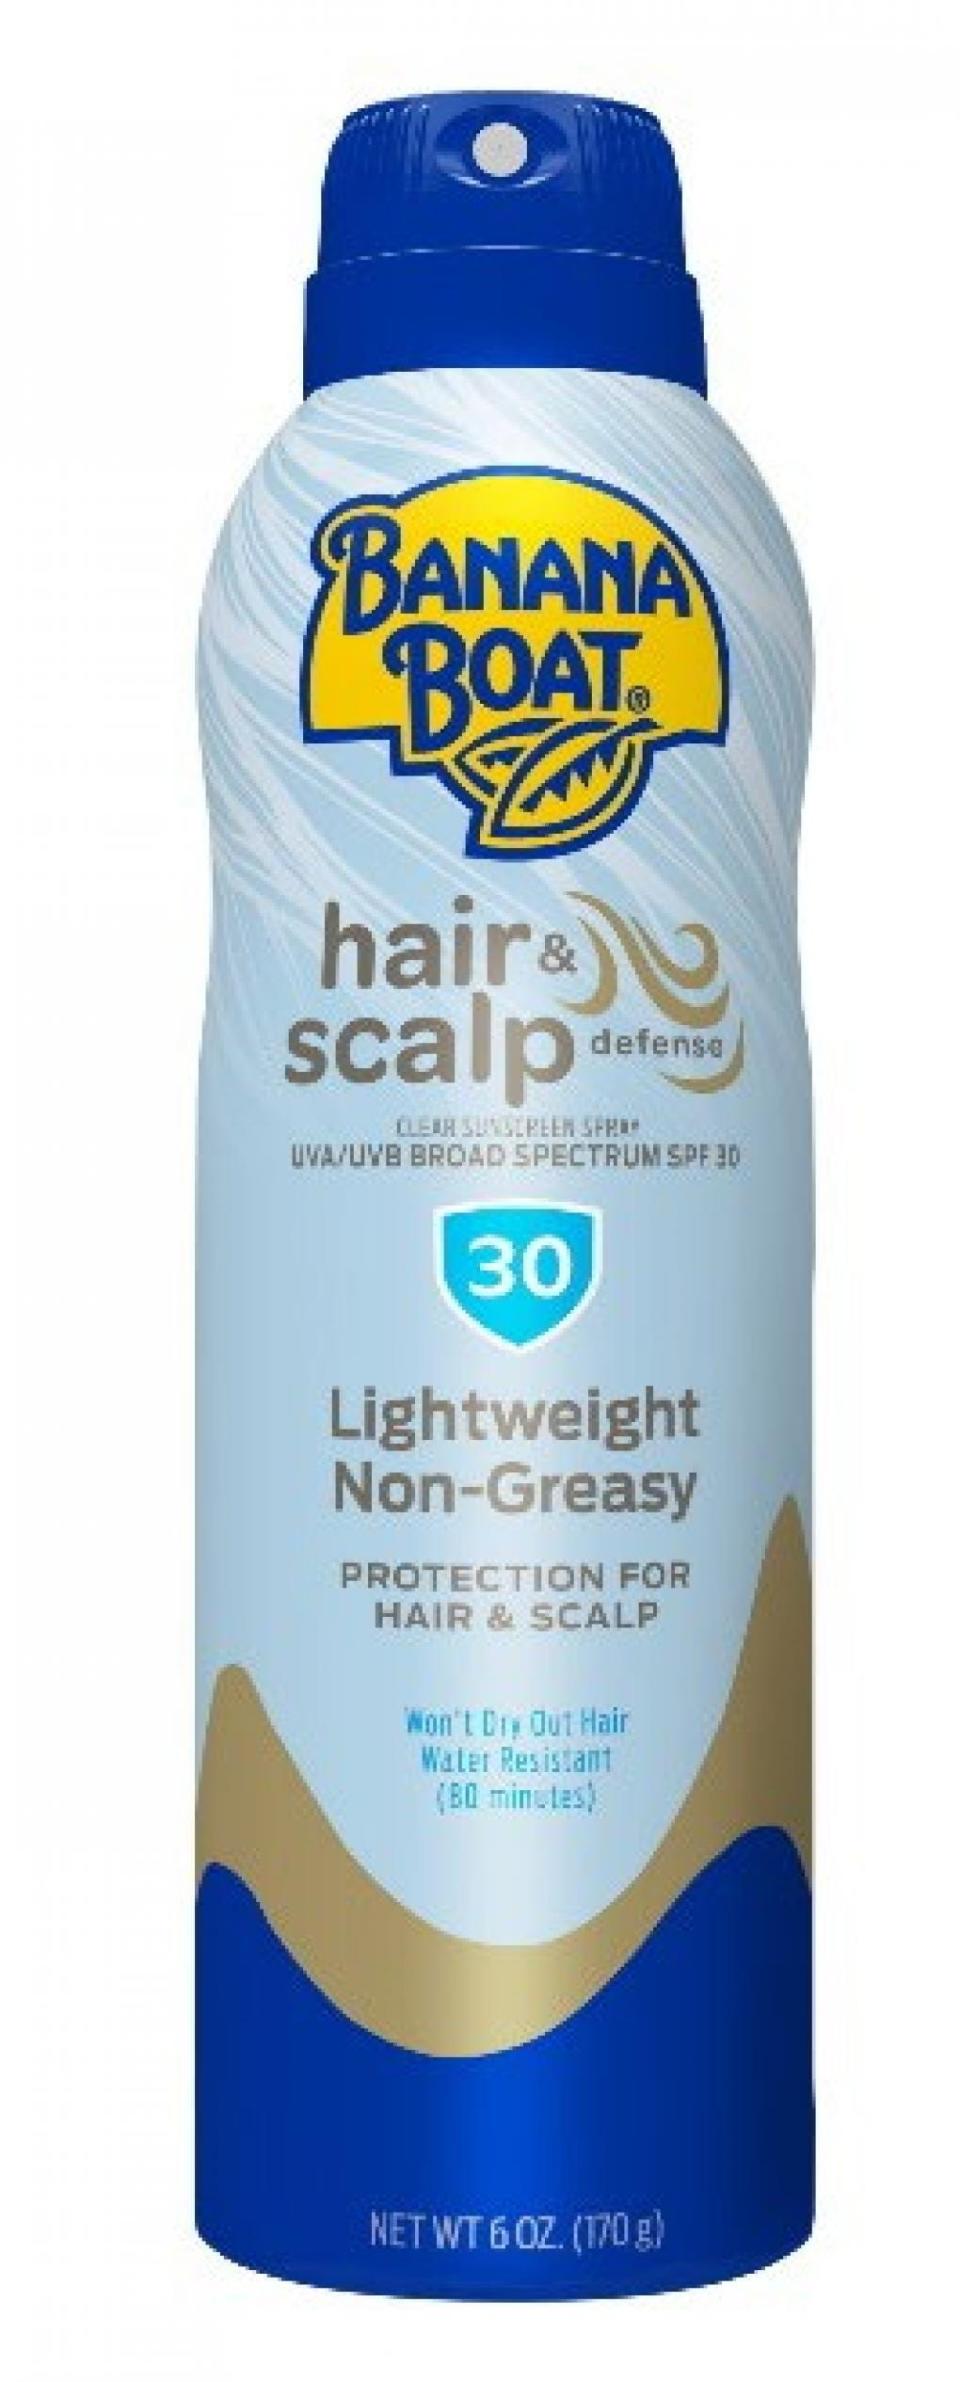 Banana Boat added a third batch to a 2022 recall of its hair and scalp sunscreen.